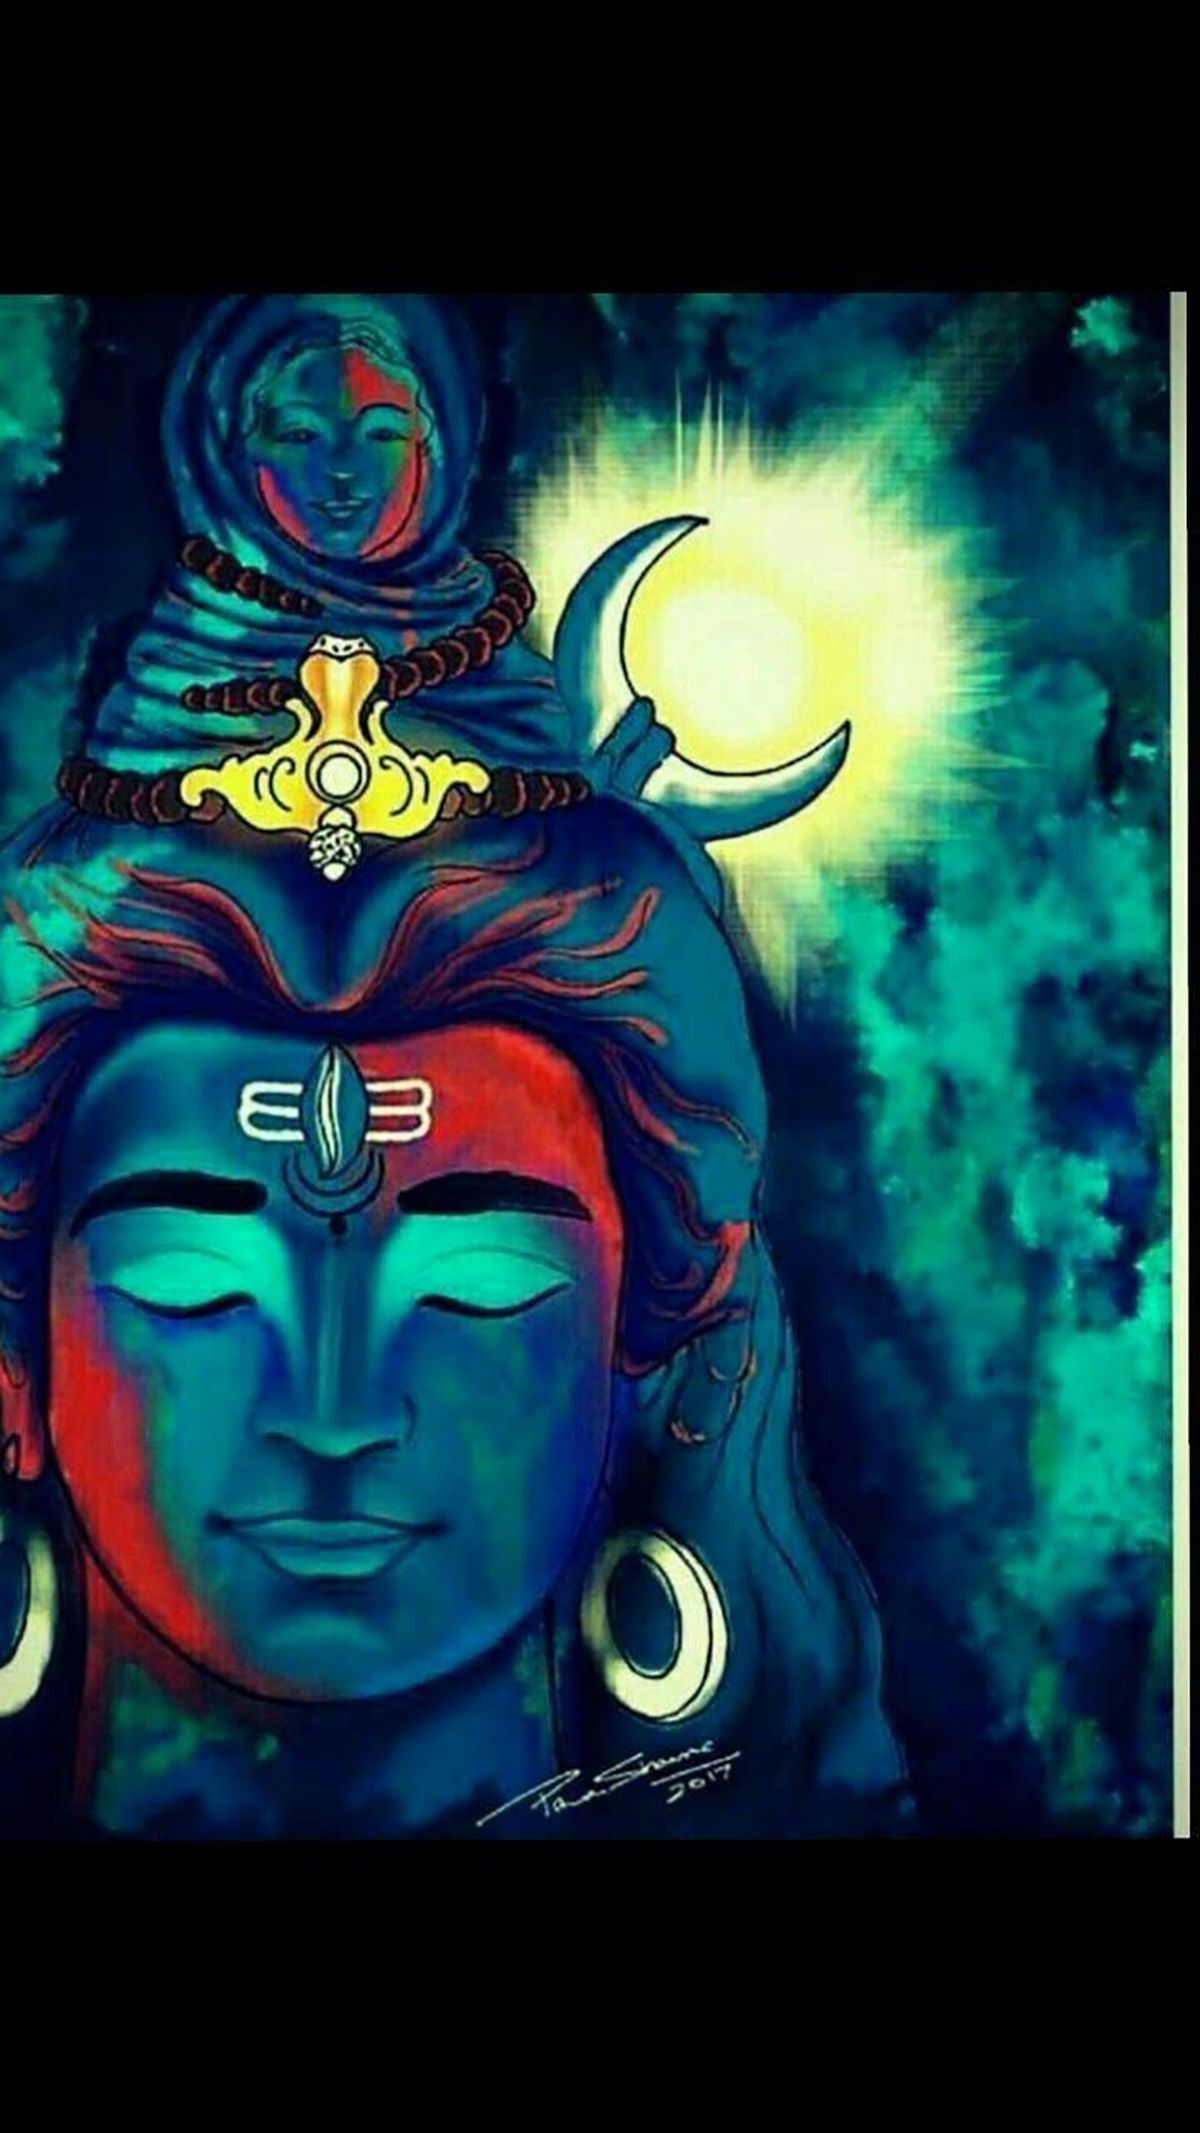 Mahakal background download for photo editing Mahadev cb background  download 2019  LEARNINGWITHSR